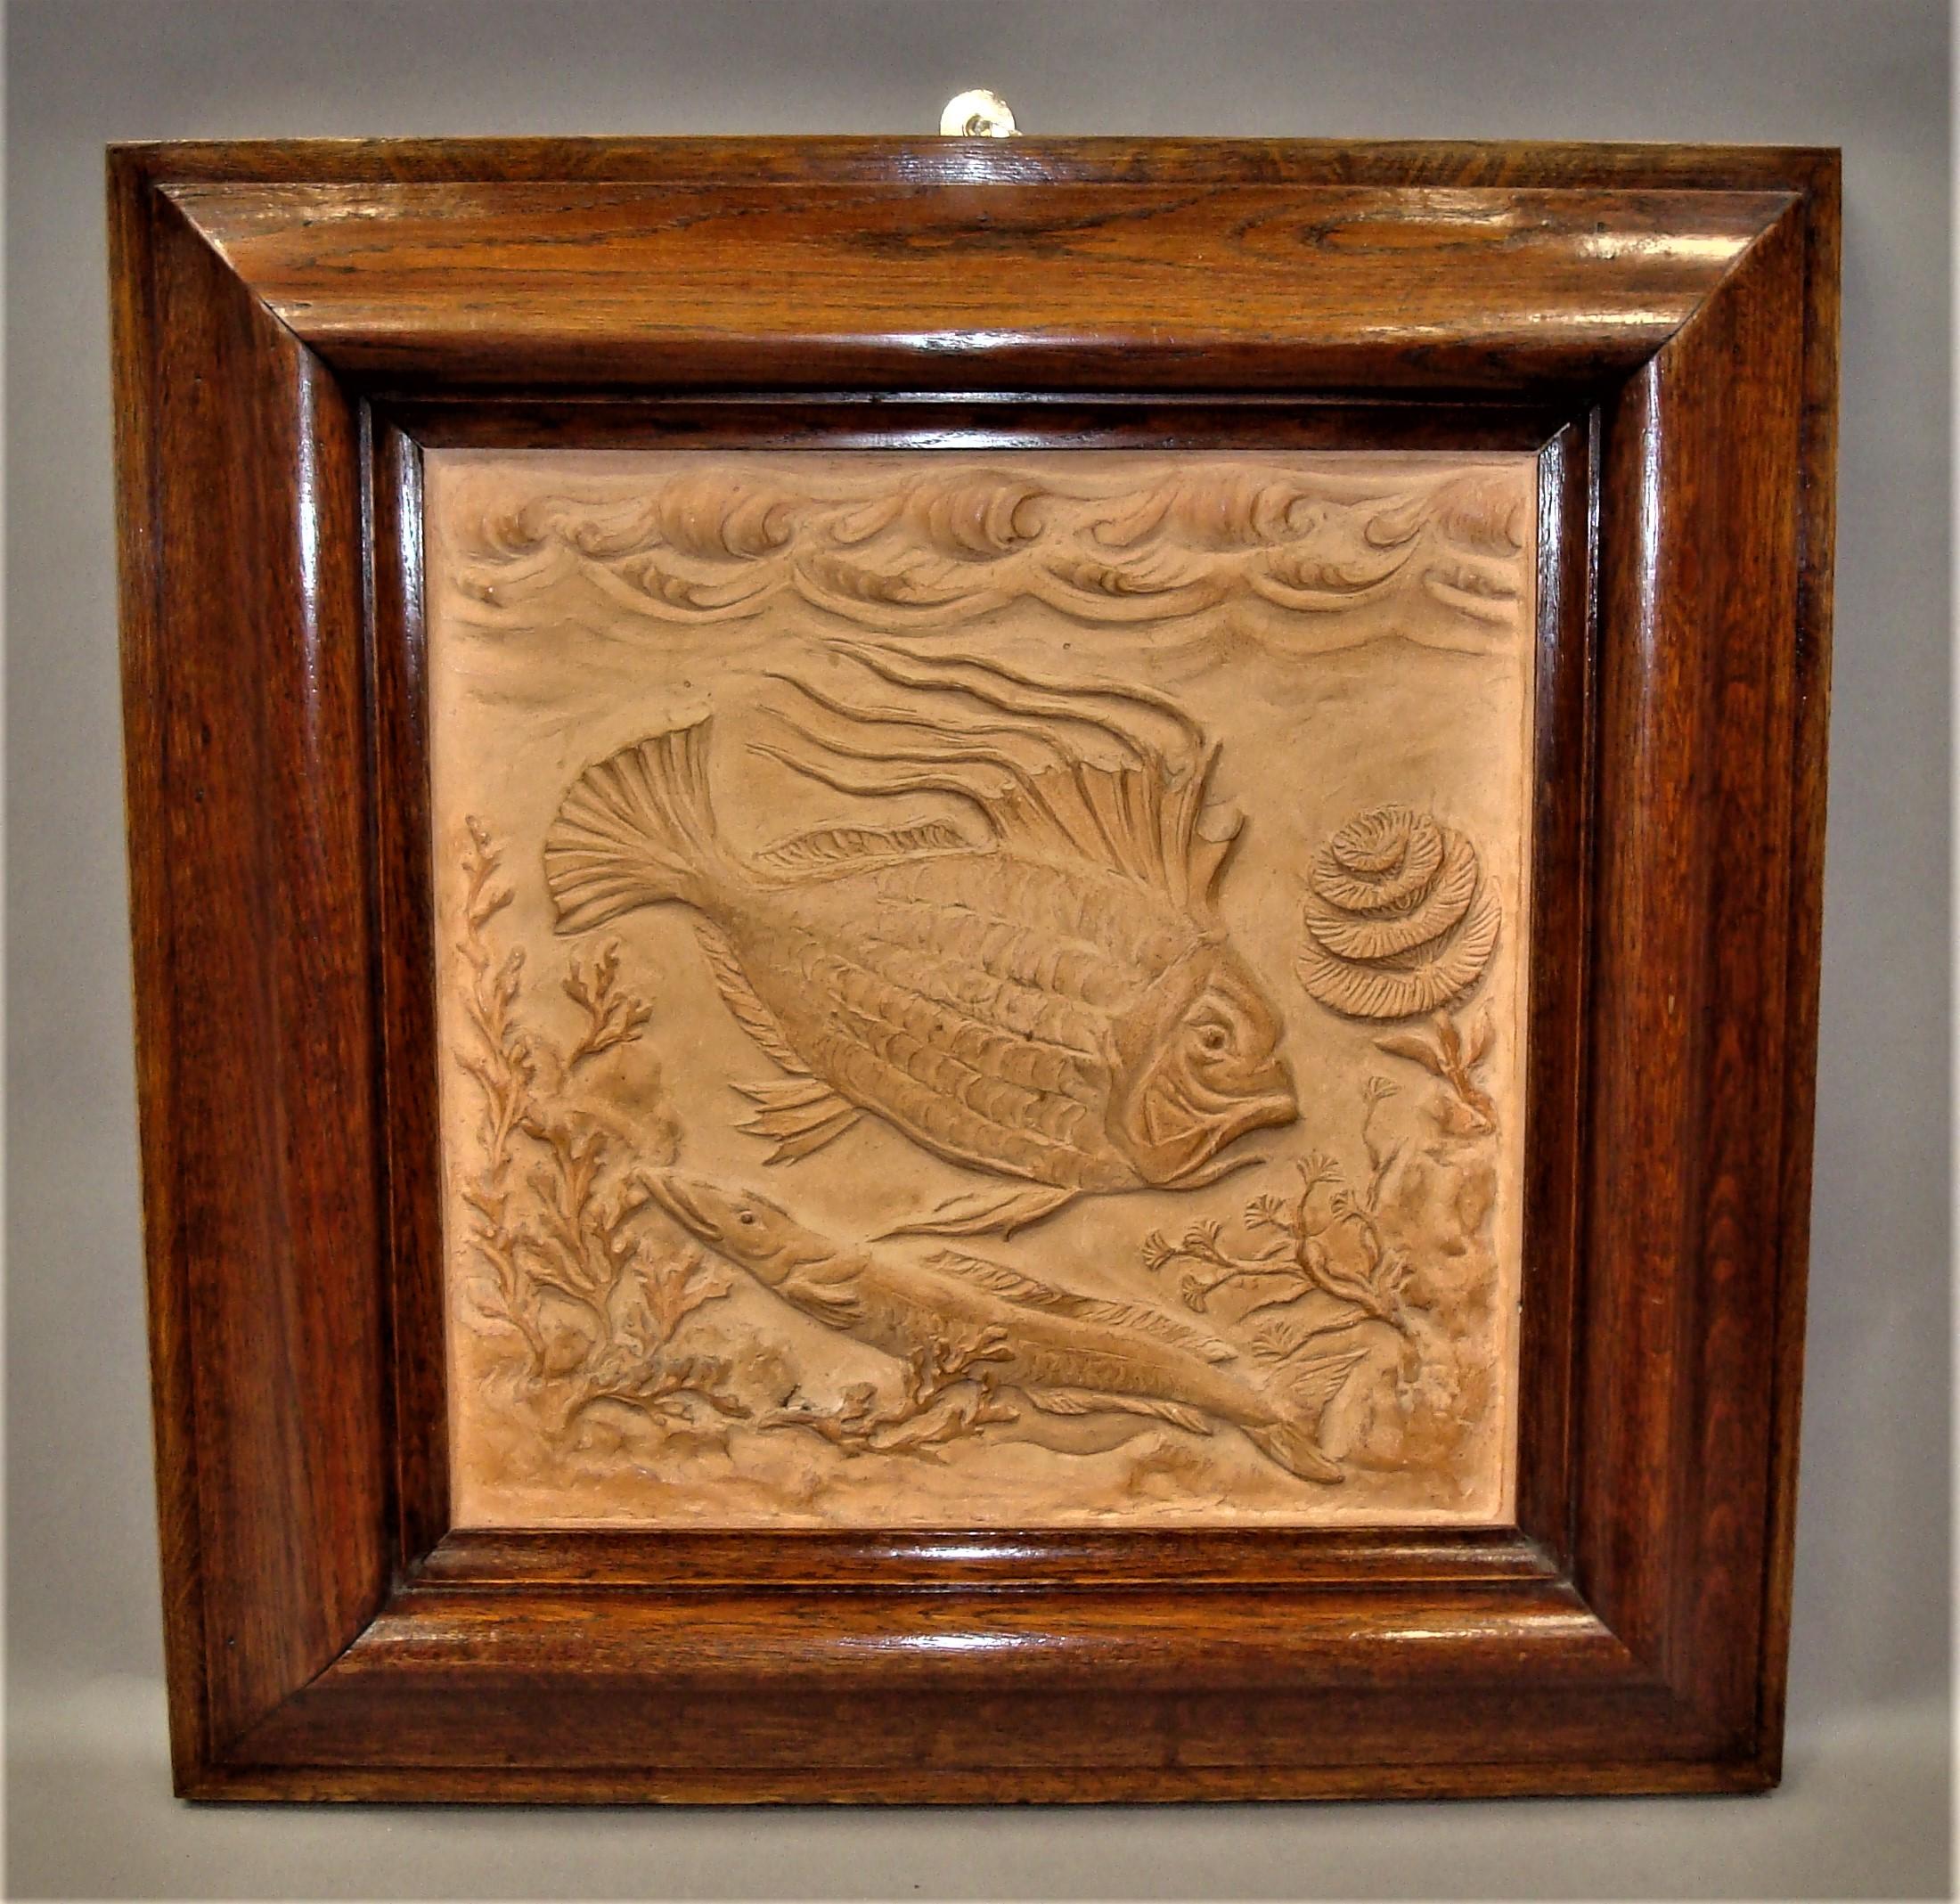 Unusual 19th century pair of terracotta plaques; the square panels finely sculpted each depicting a large swimming fish and sea creature with corals, plants and seaweed. Housed in a bold ogee moulded frame which have a good colour and